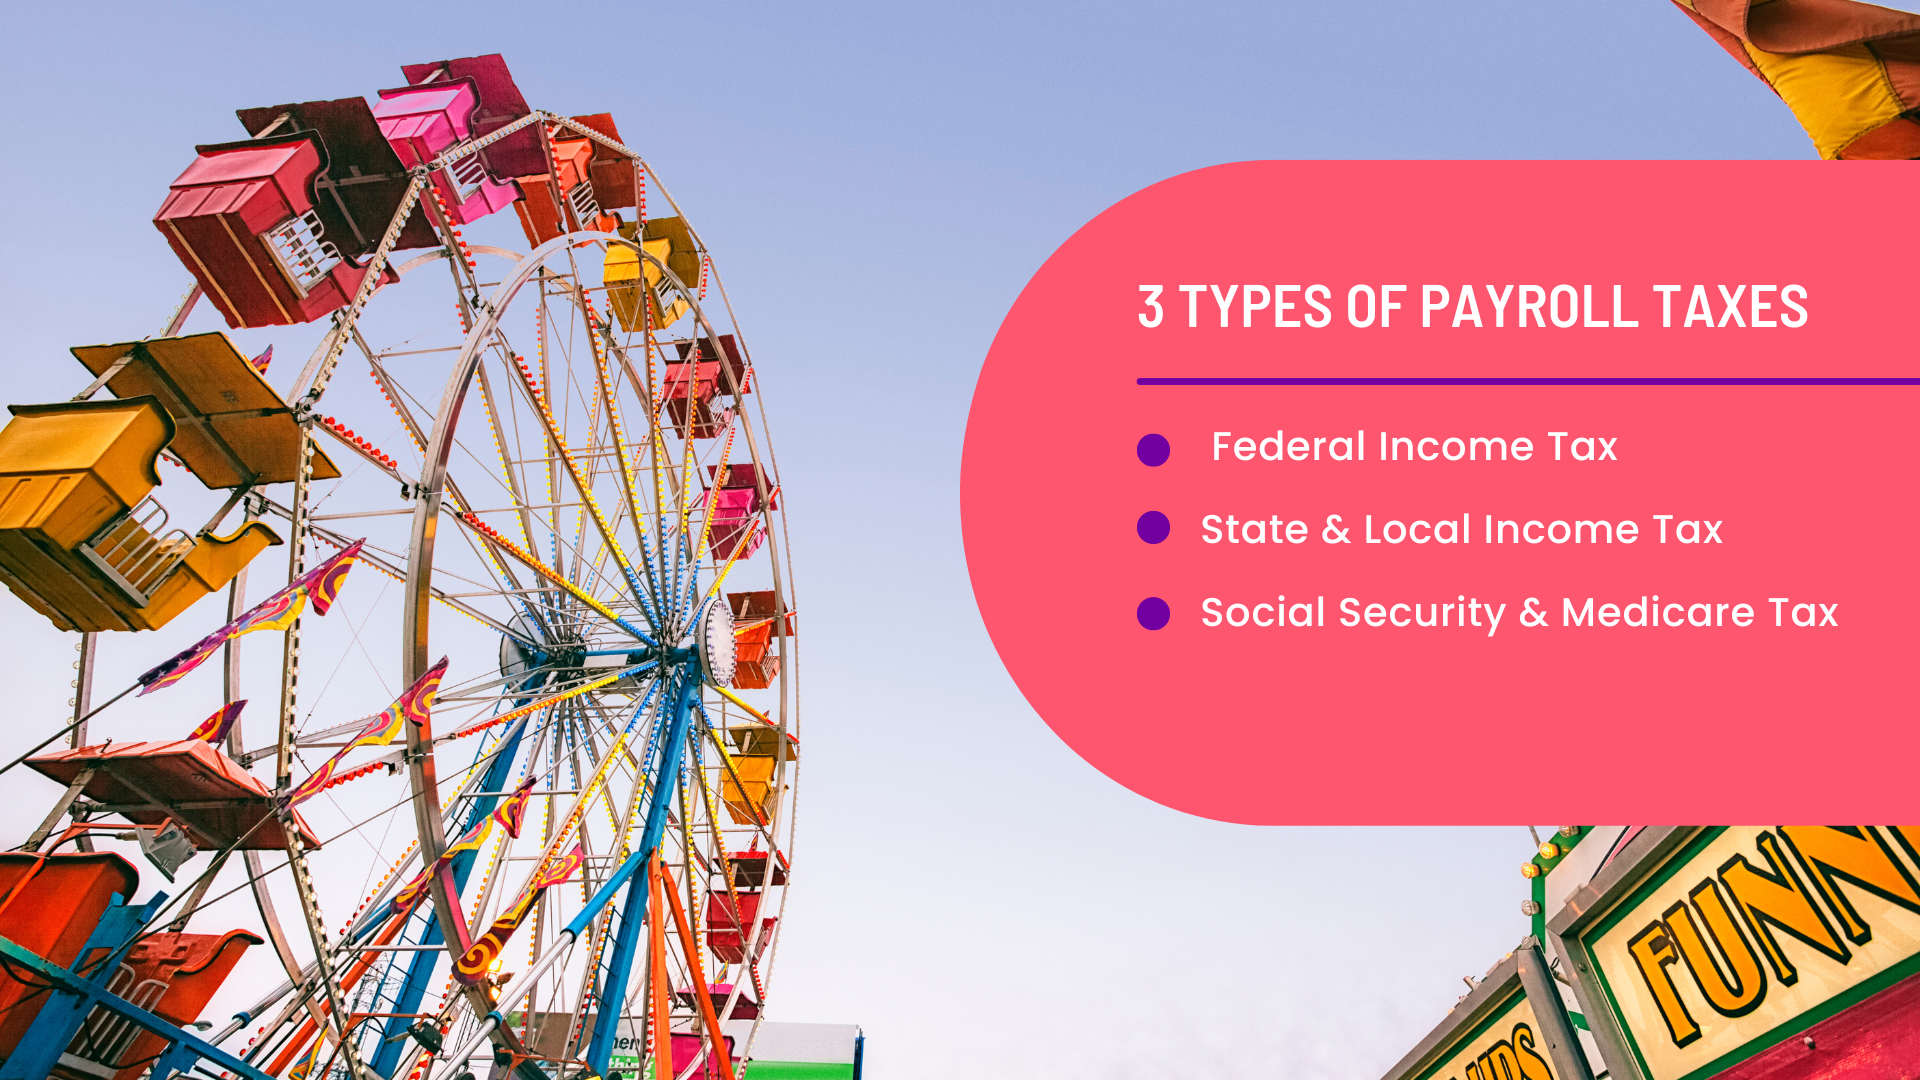 A Ferris wheel at a carnival with text next to it listing the three types of payroll taxes: federal income tax, state and local income tax, and Social Security and Medicare (FICA) tax.